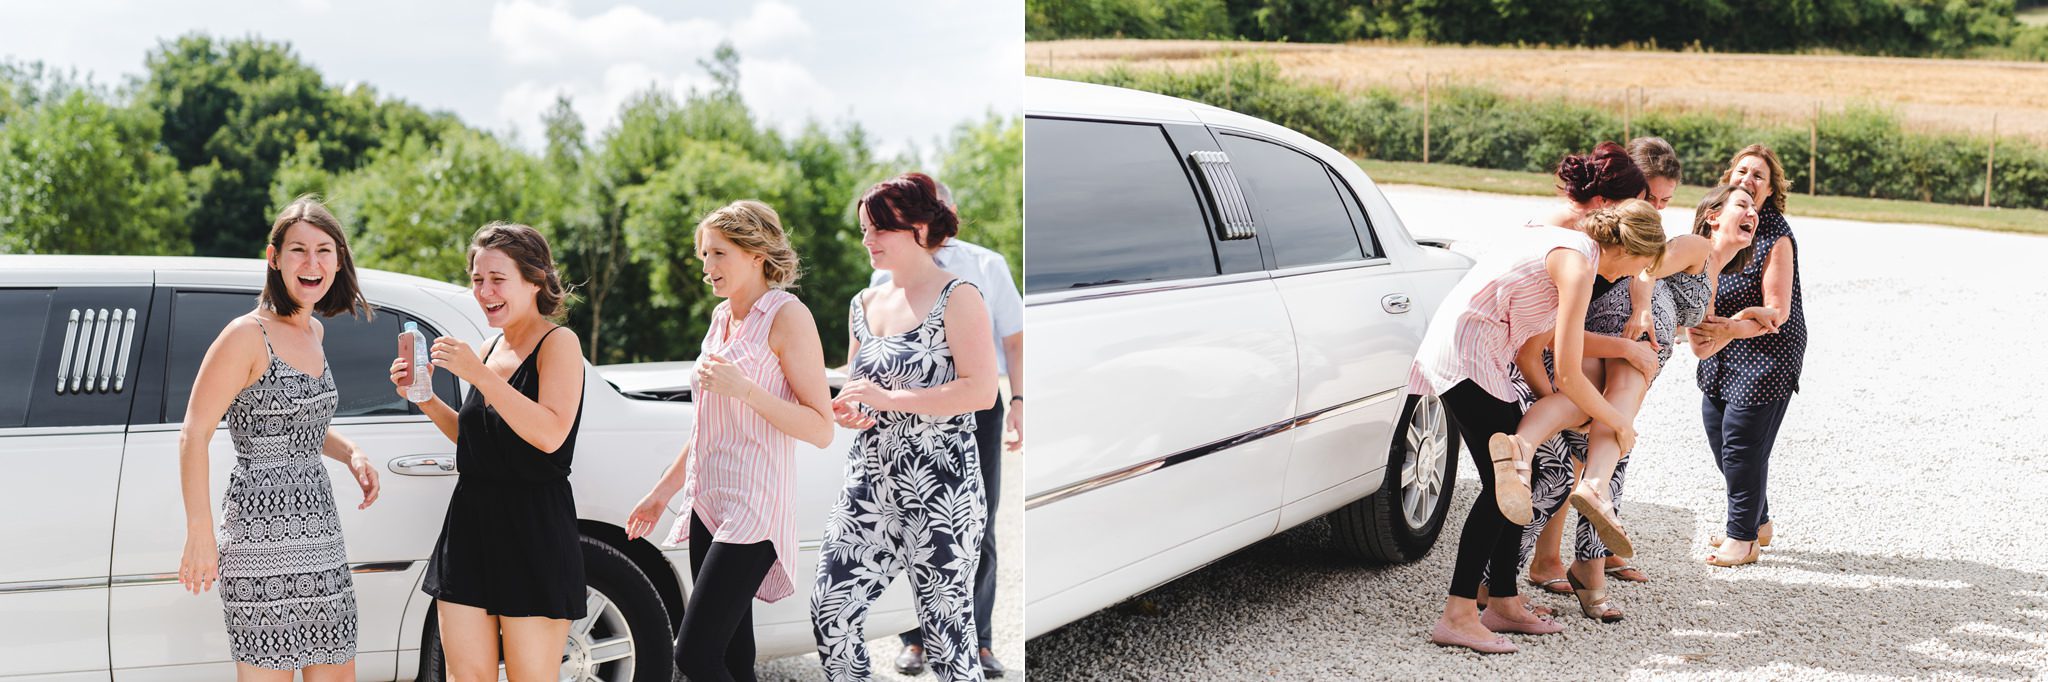 Bride and bridesmaids getting out of a limousine